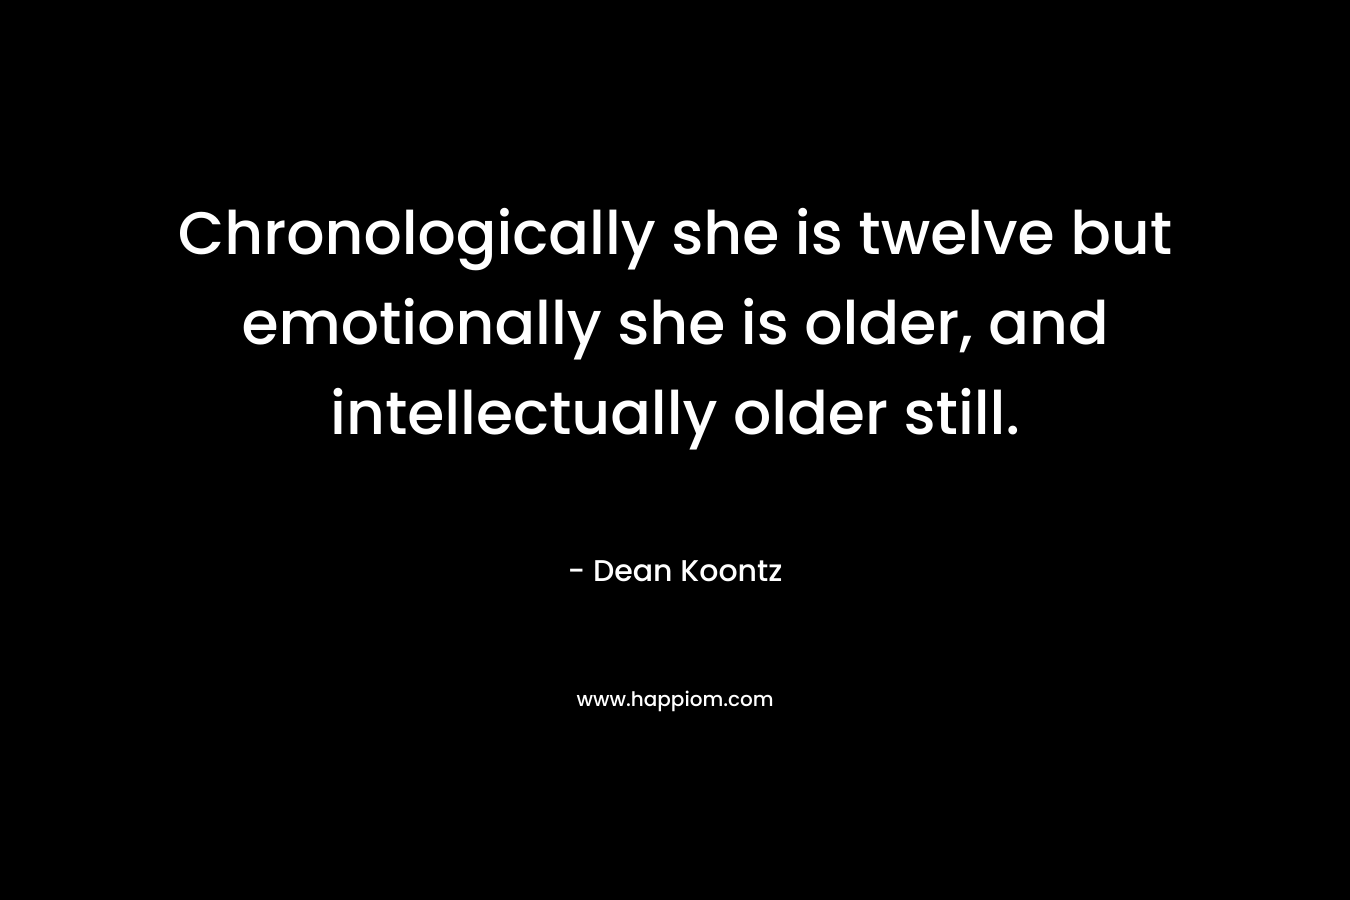 Chronologically she is twelve but emotionally she is older, and intellectually older still. – Dean Koontz